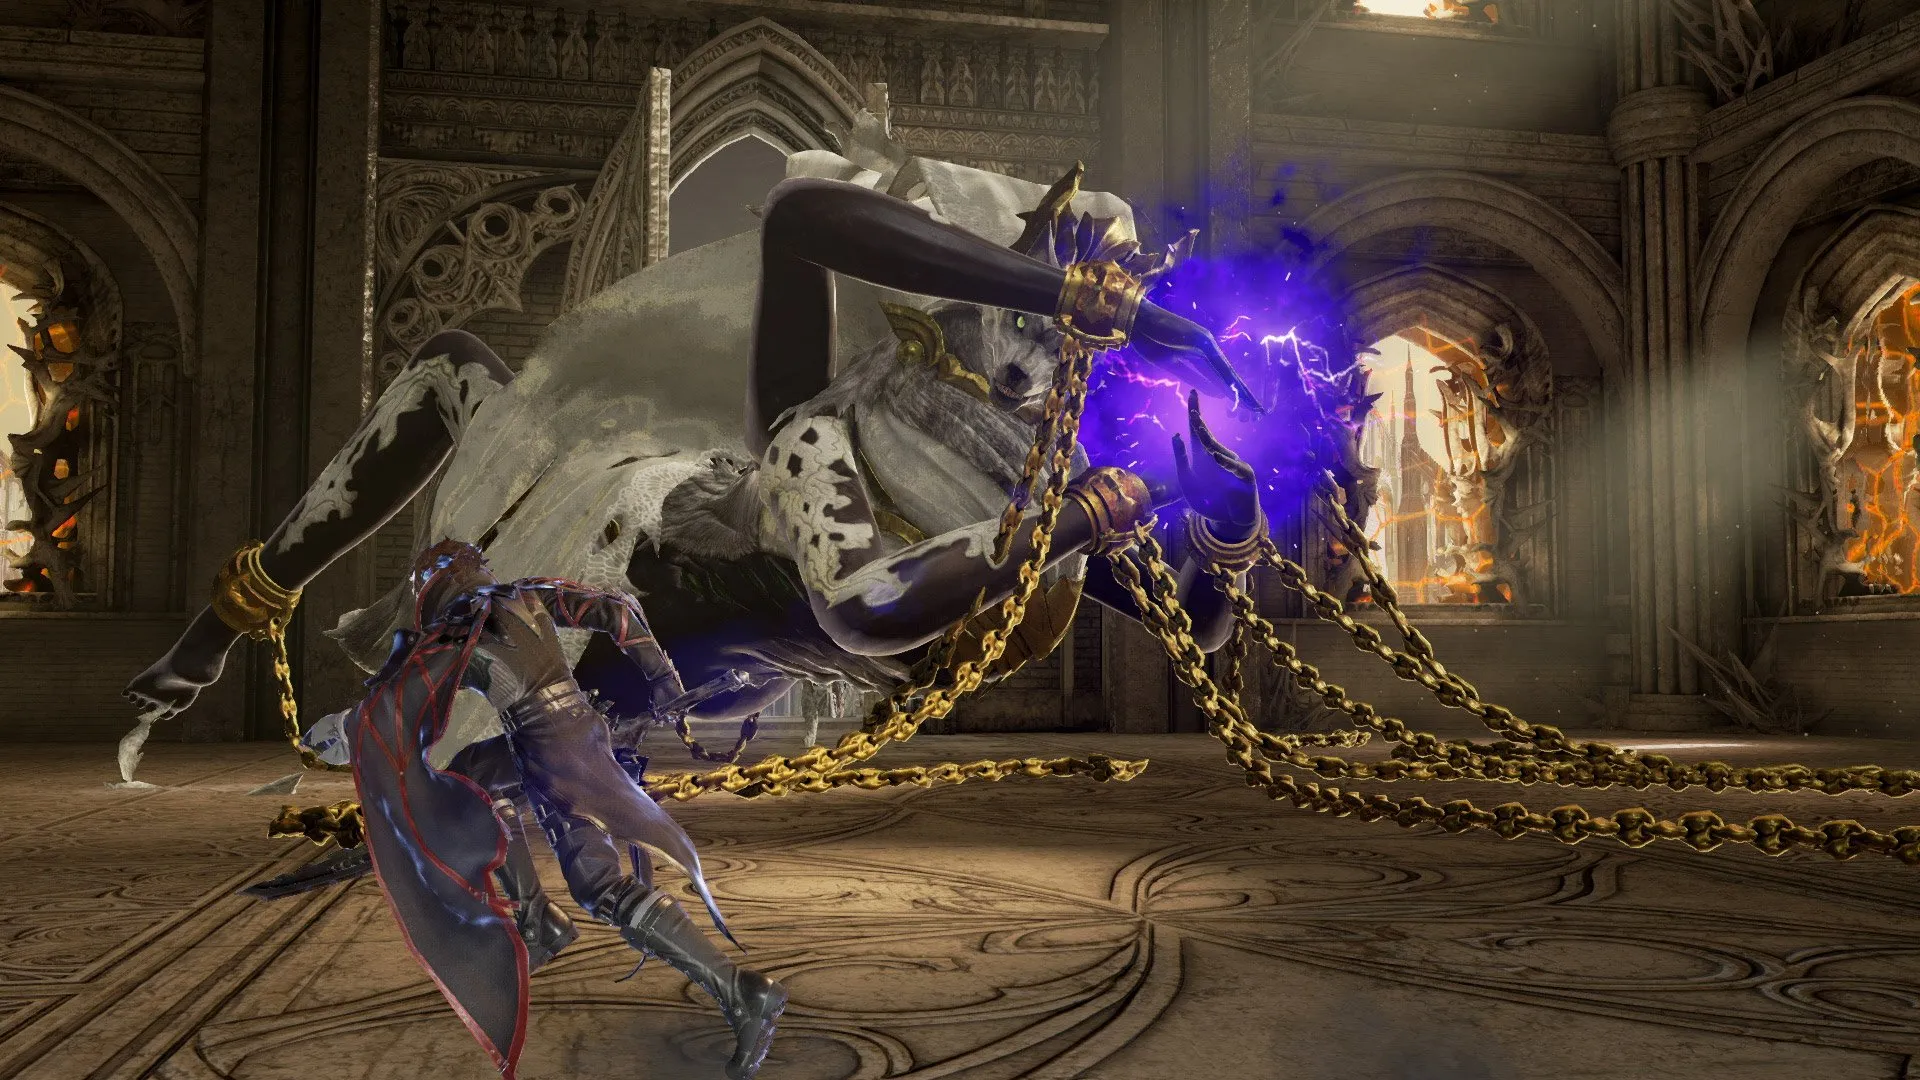 Code Vein Shows Battle Against Successor Of The Ribcage In New Video -  Noisy Pixel